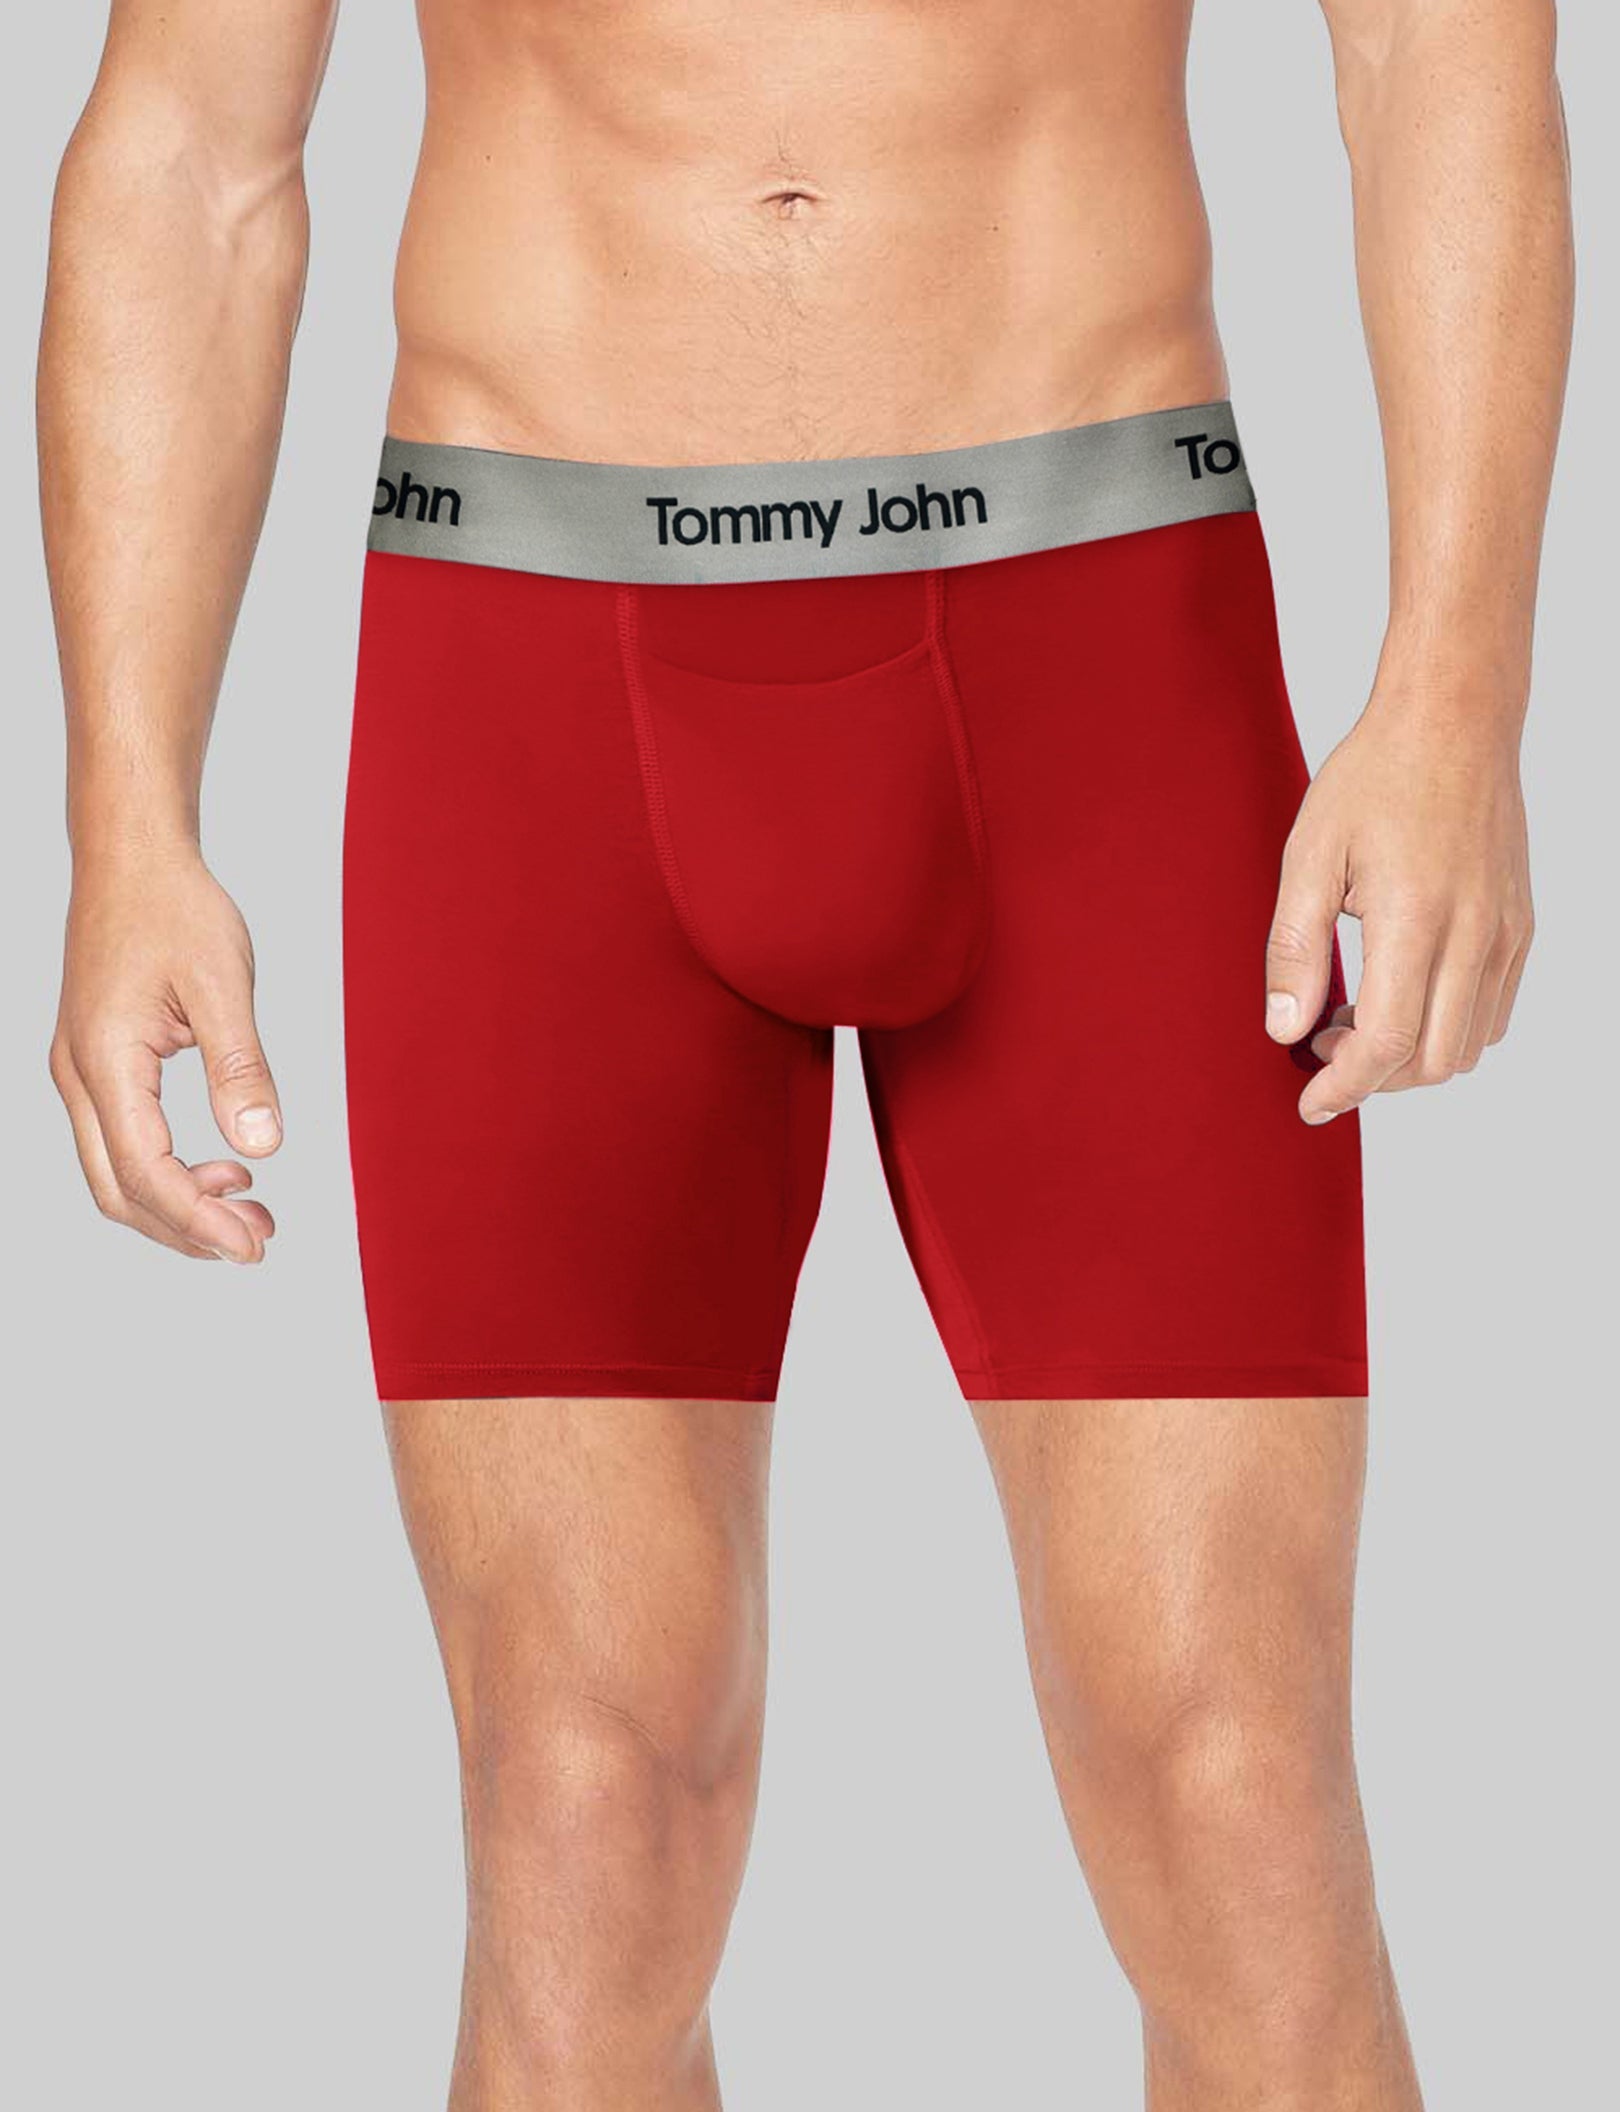 Tommy John Second Skin Wave Trunk Boxer Brief Underwear Sz M Colorblock Red  Blue – St. John's Institute (Hua Ming)